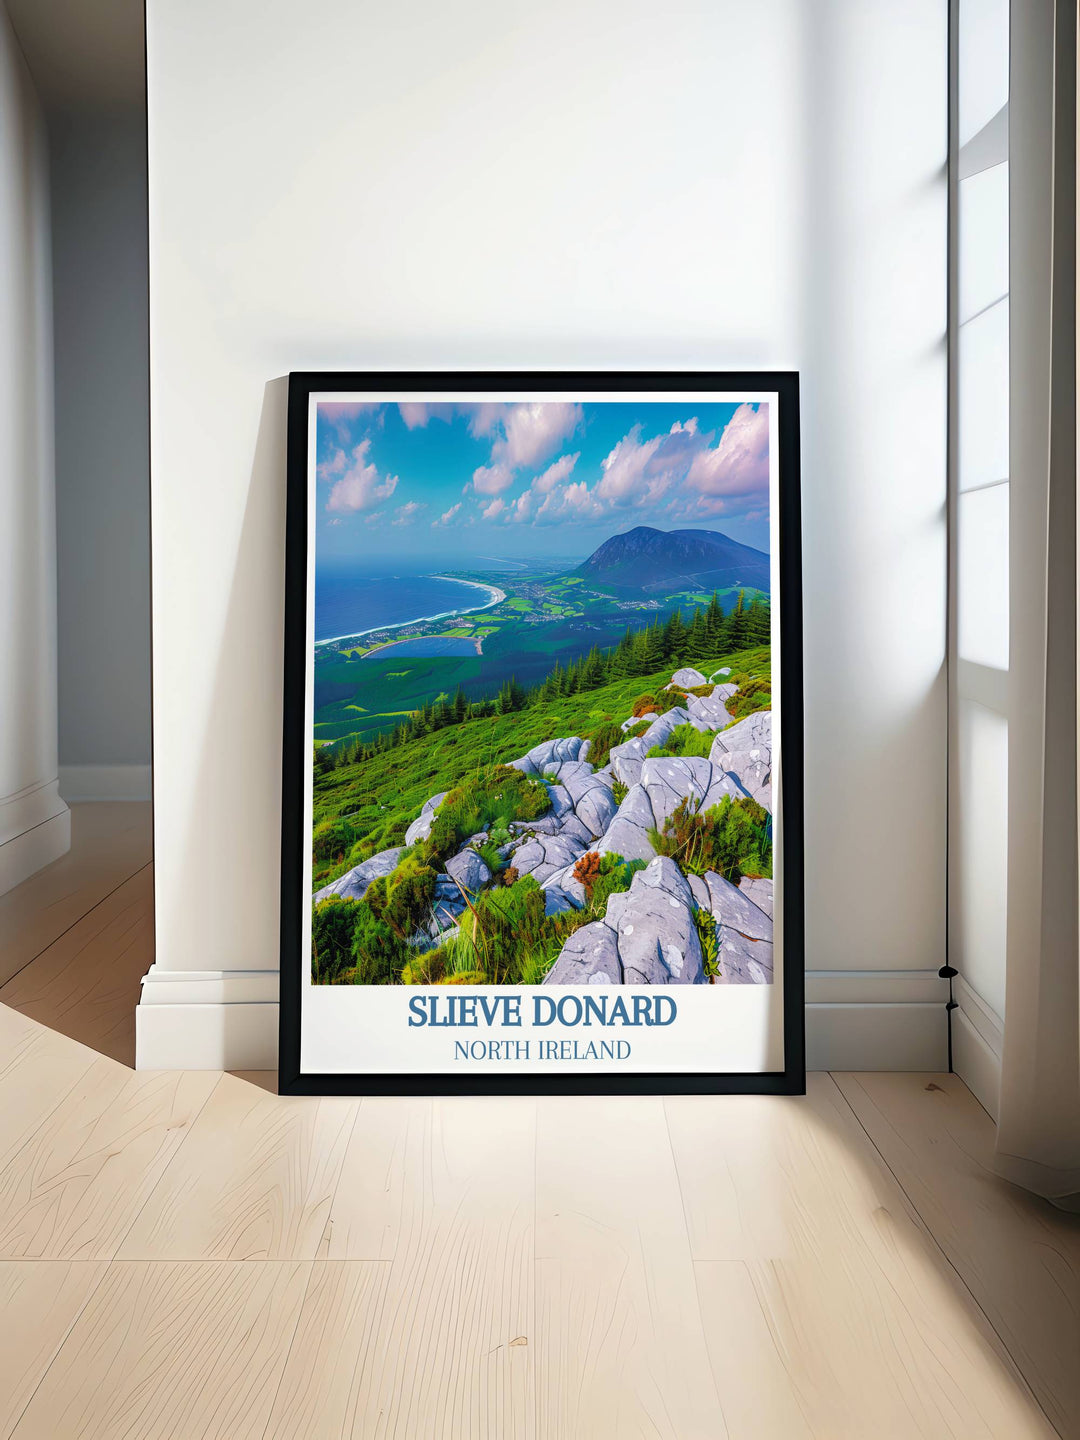 Slieve Donard summit modern wall decor captures the breathtaking view of Northern Irelands highest peak with lush valleys and dramatic skies. Perfect for nature lovers, this art brings the pristine beauty of the Mourne Mountains into your home, offering a daily escape to tranquility.